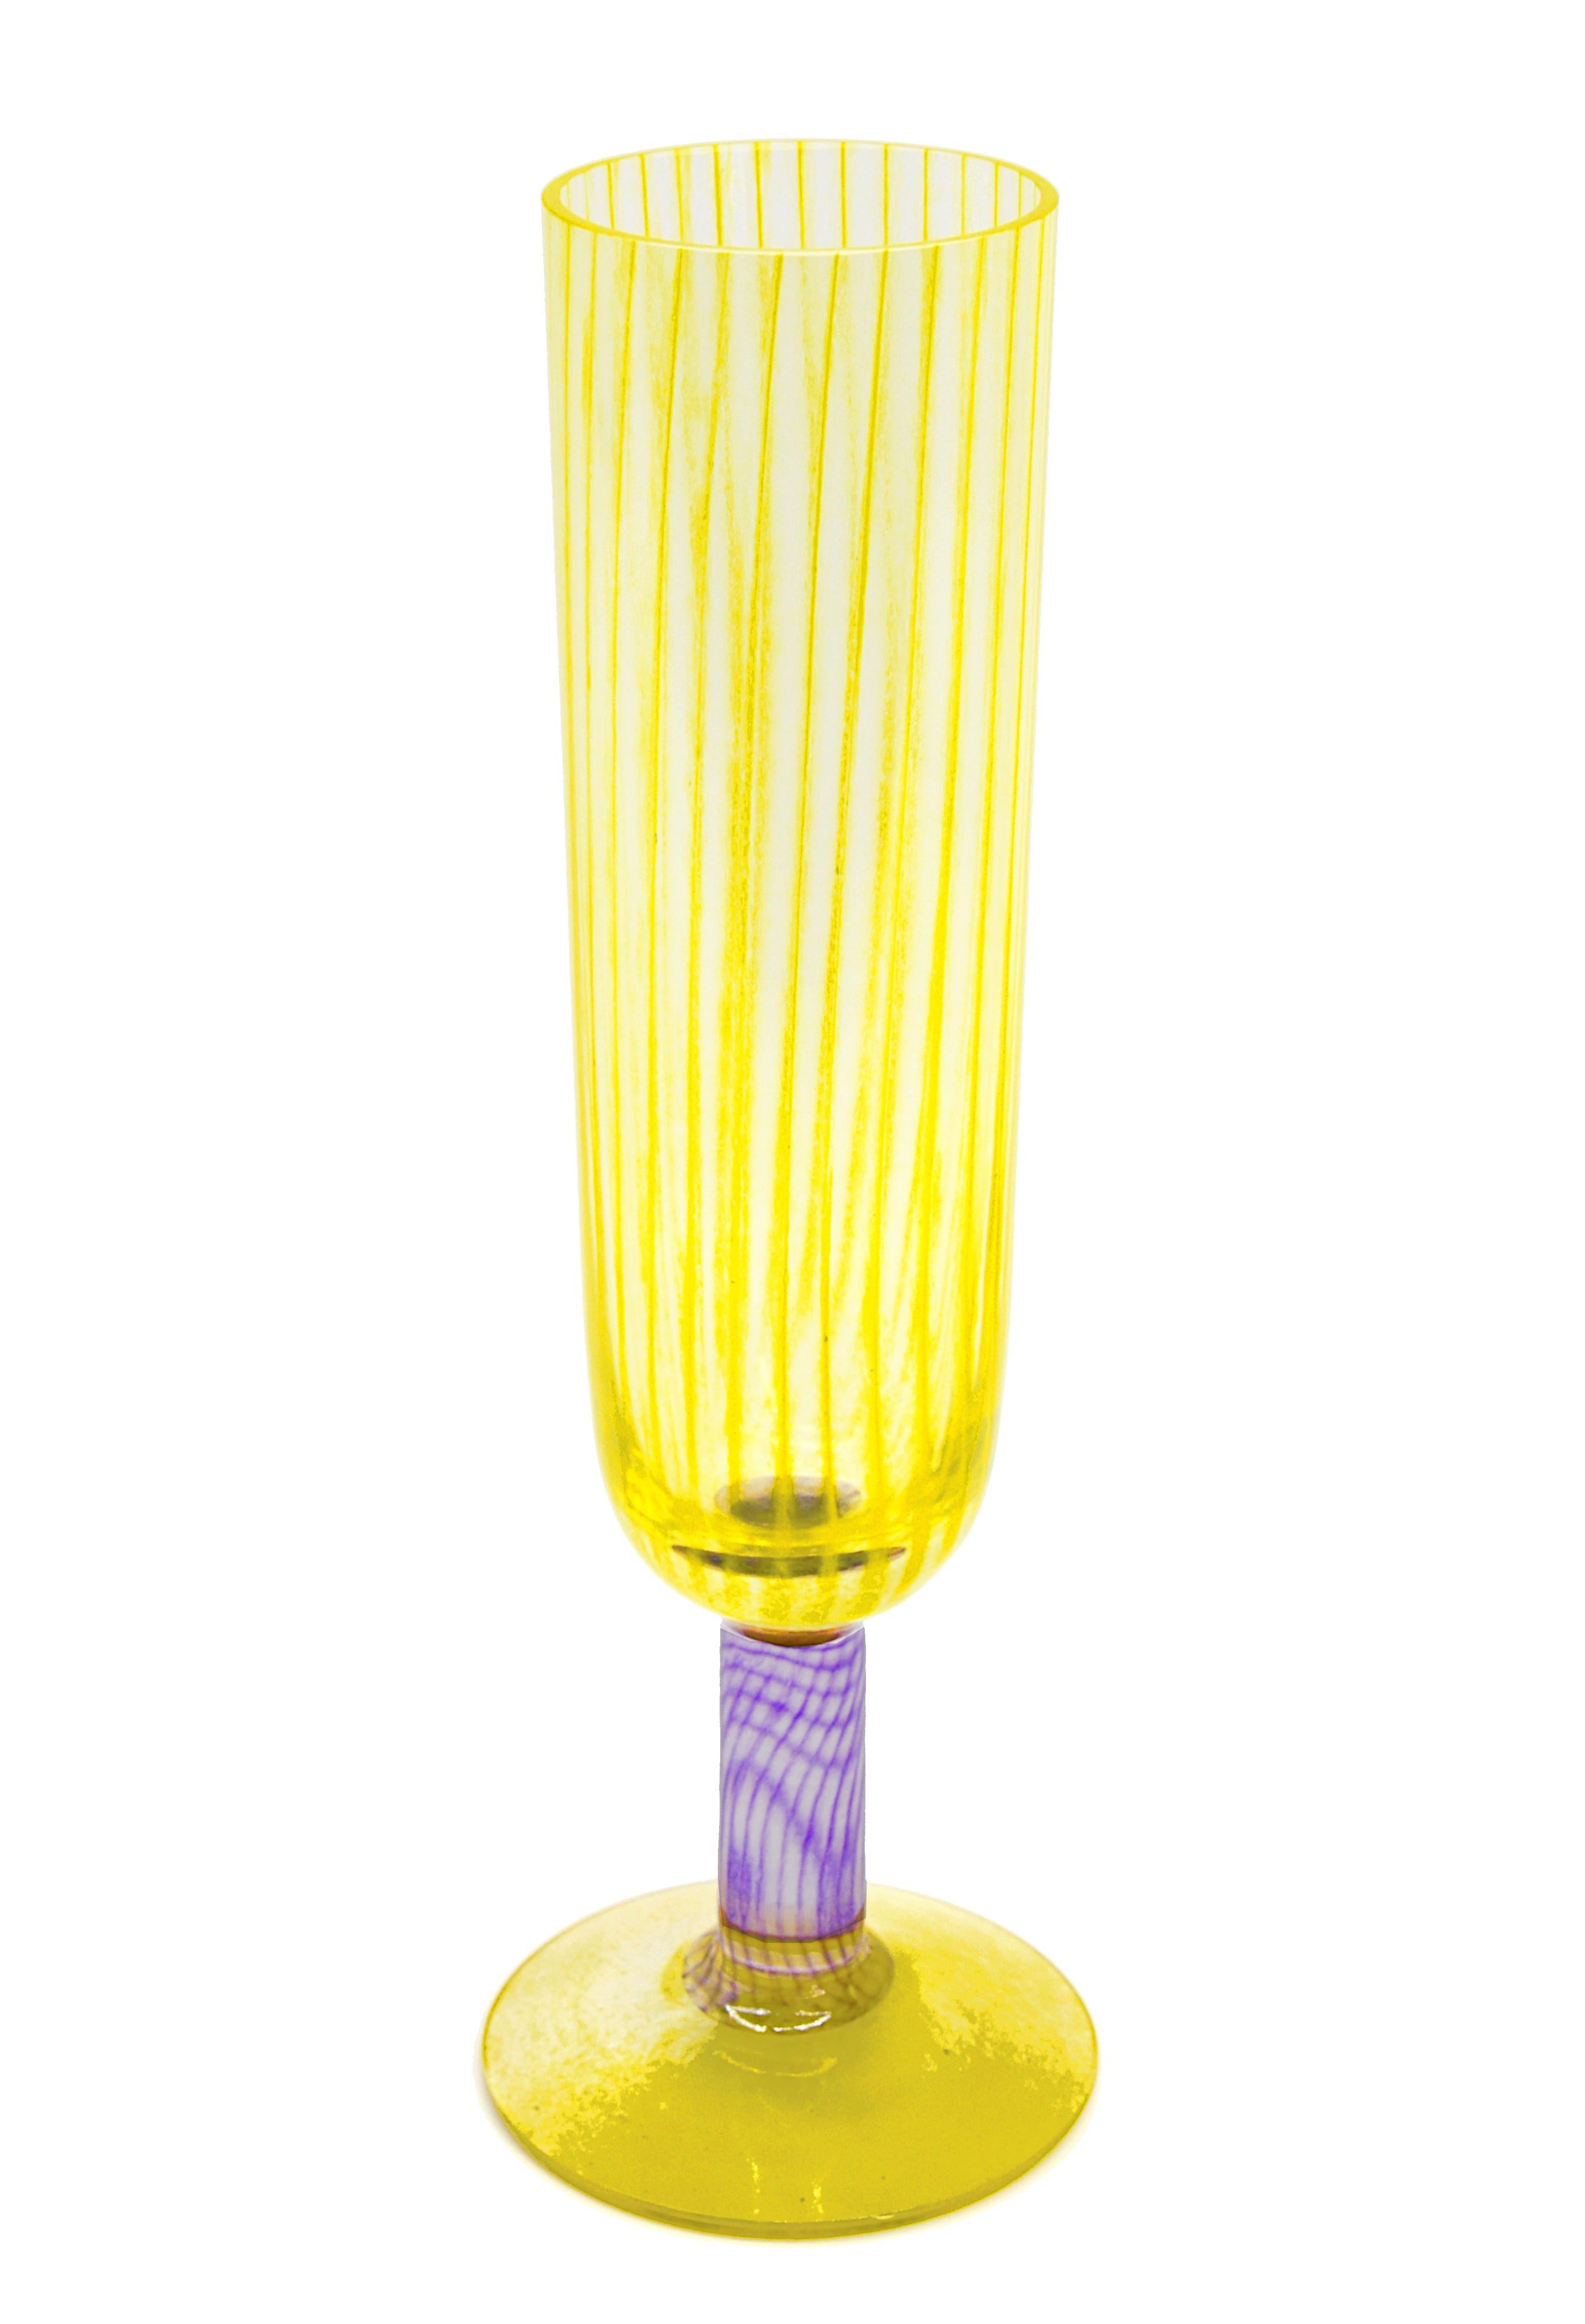 Flute vase by Kjell Engman at Kosta-Boda, Sweden, 1999. Filigree glass with yellow base and body, purple leg. Measures: Height 9.85